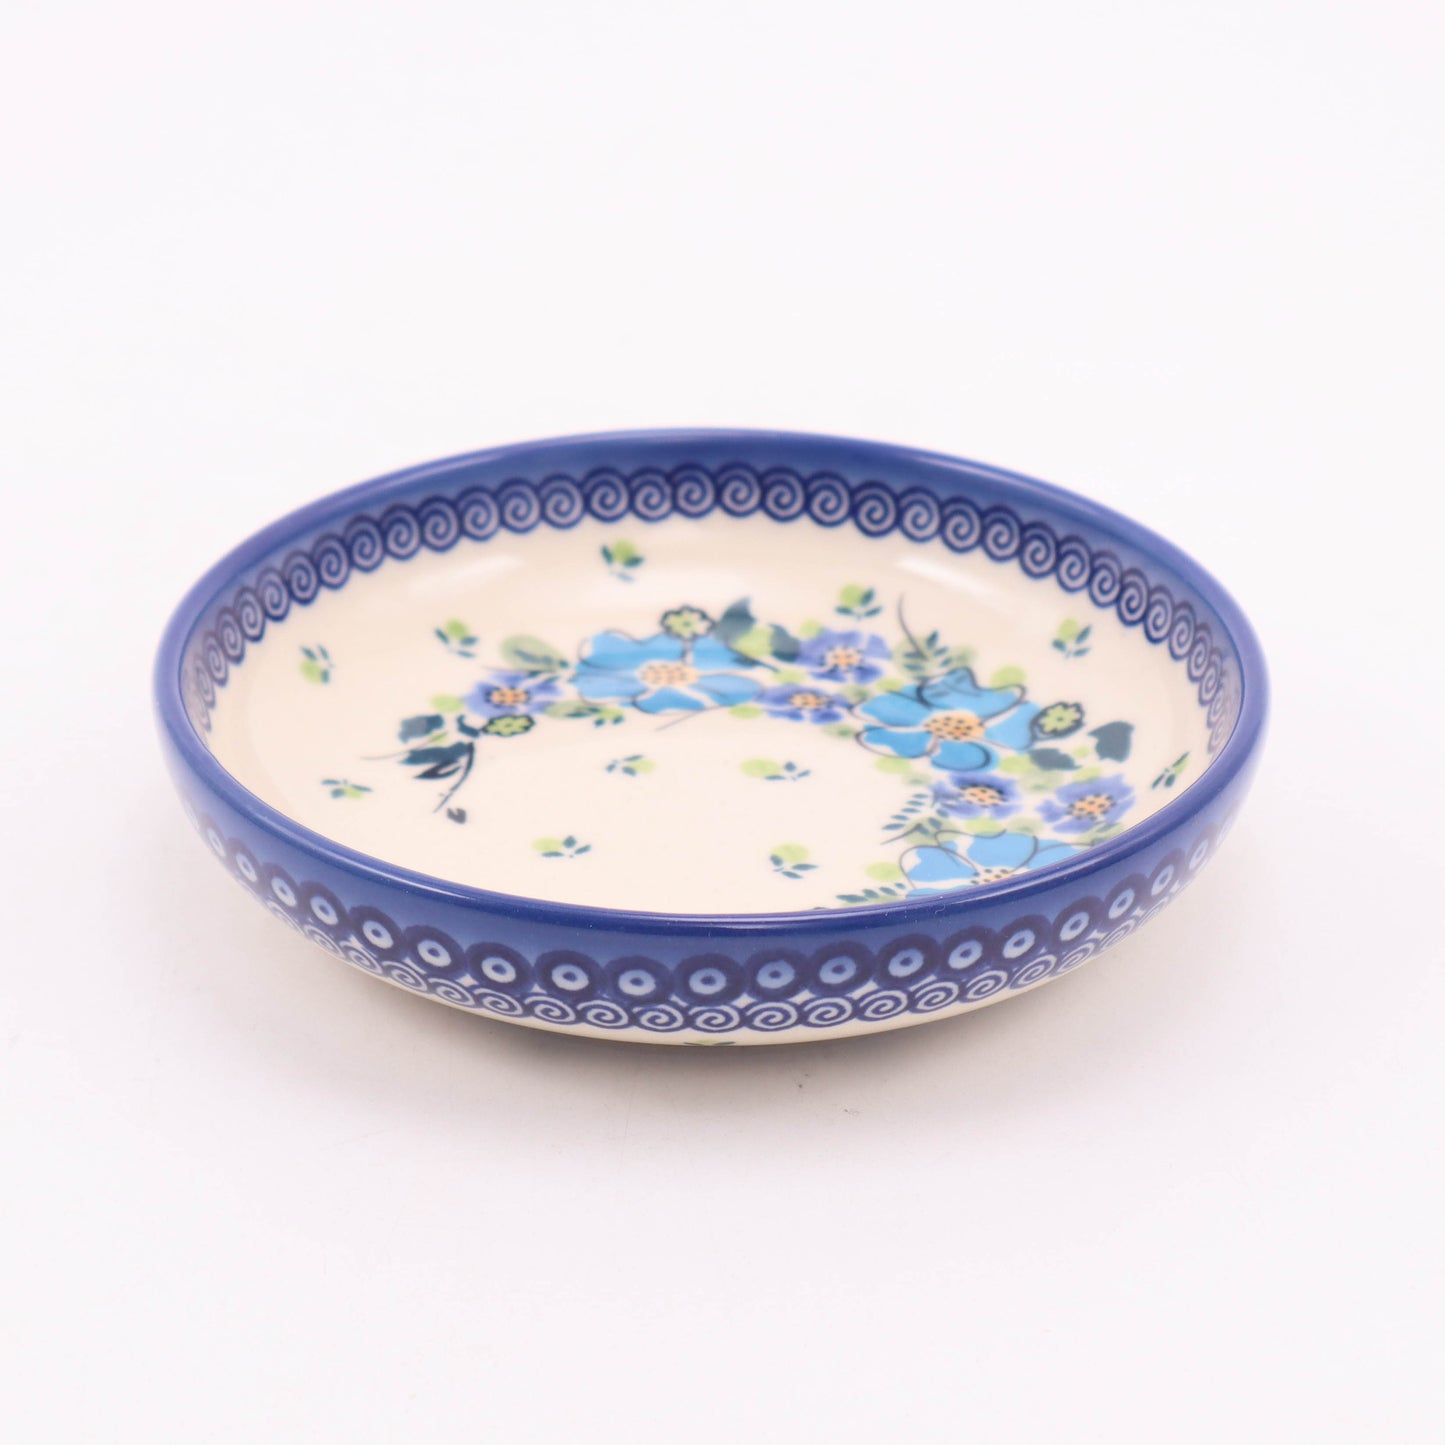 5.5" Shallow Bowl. Pattern: Periwinkle Wreath